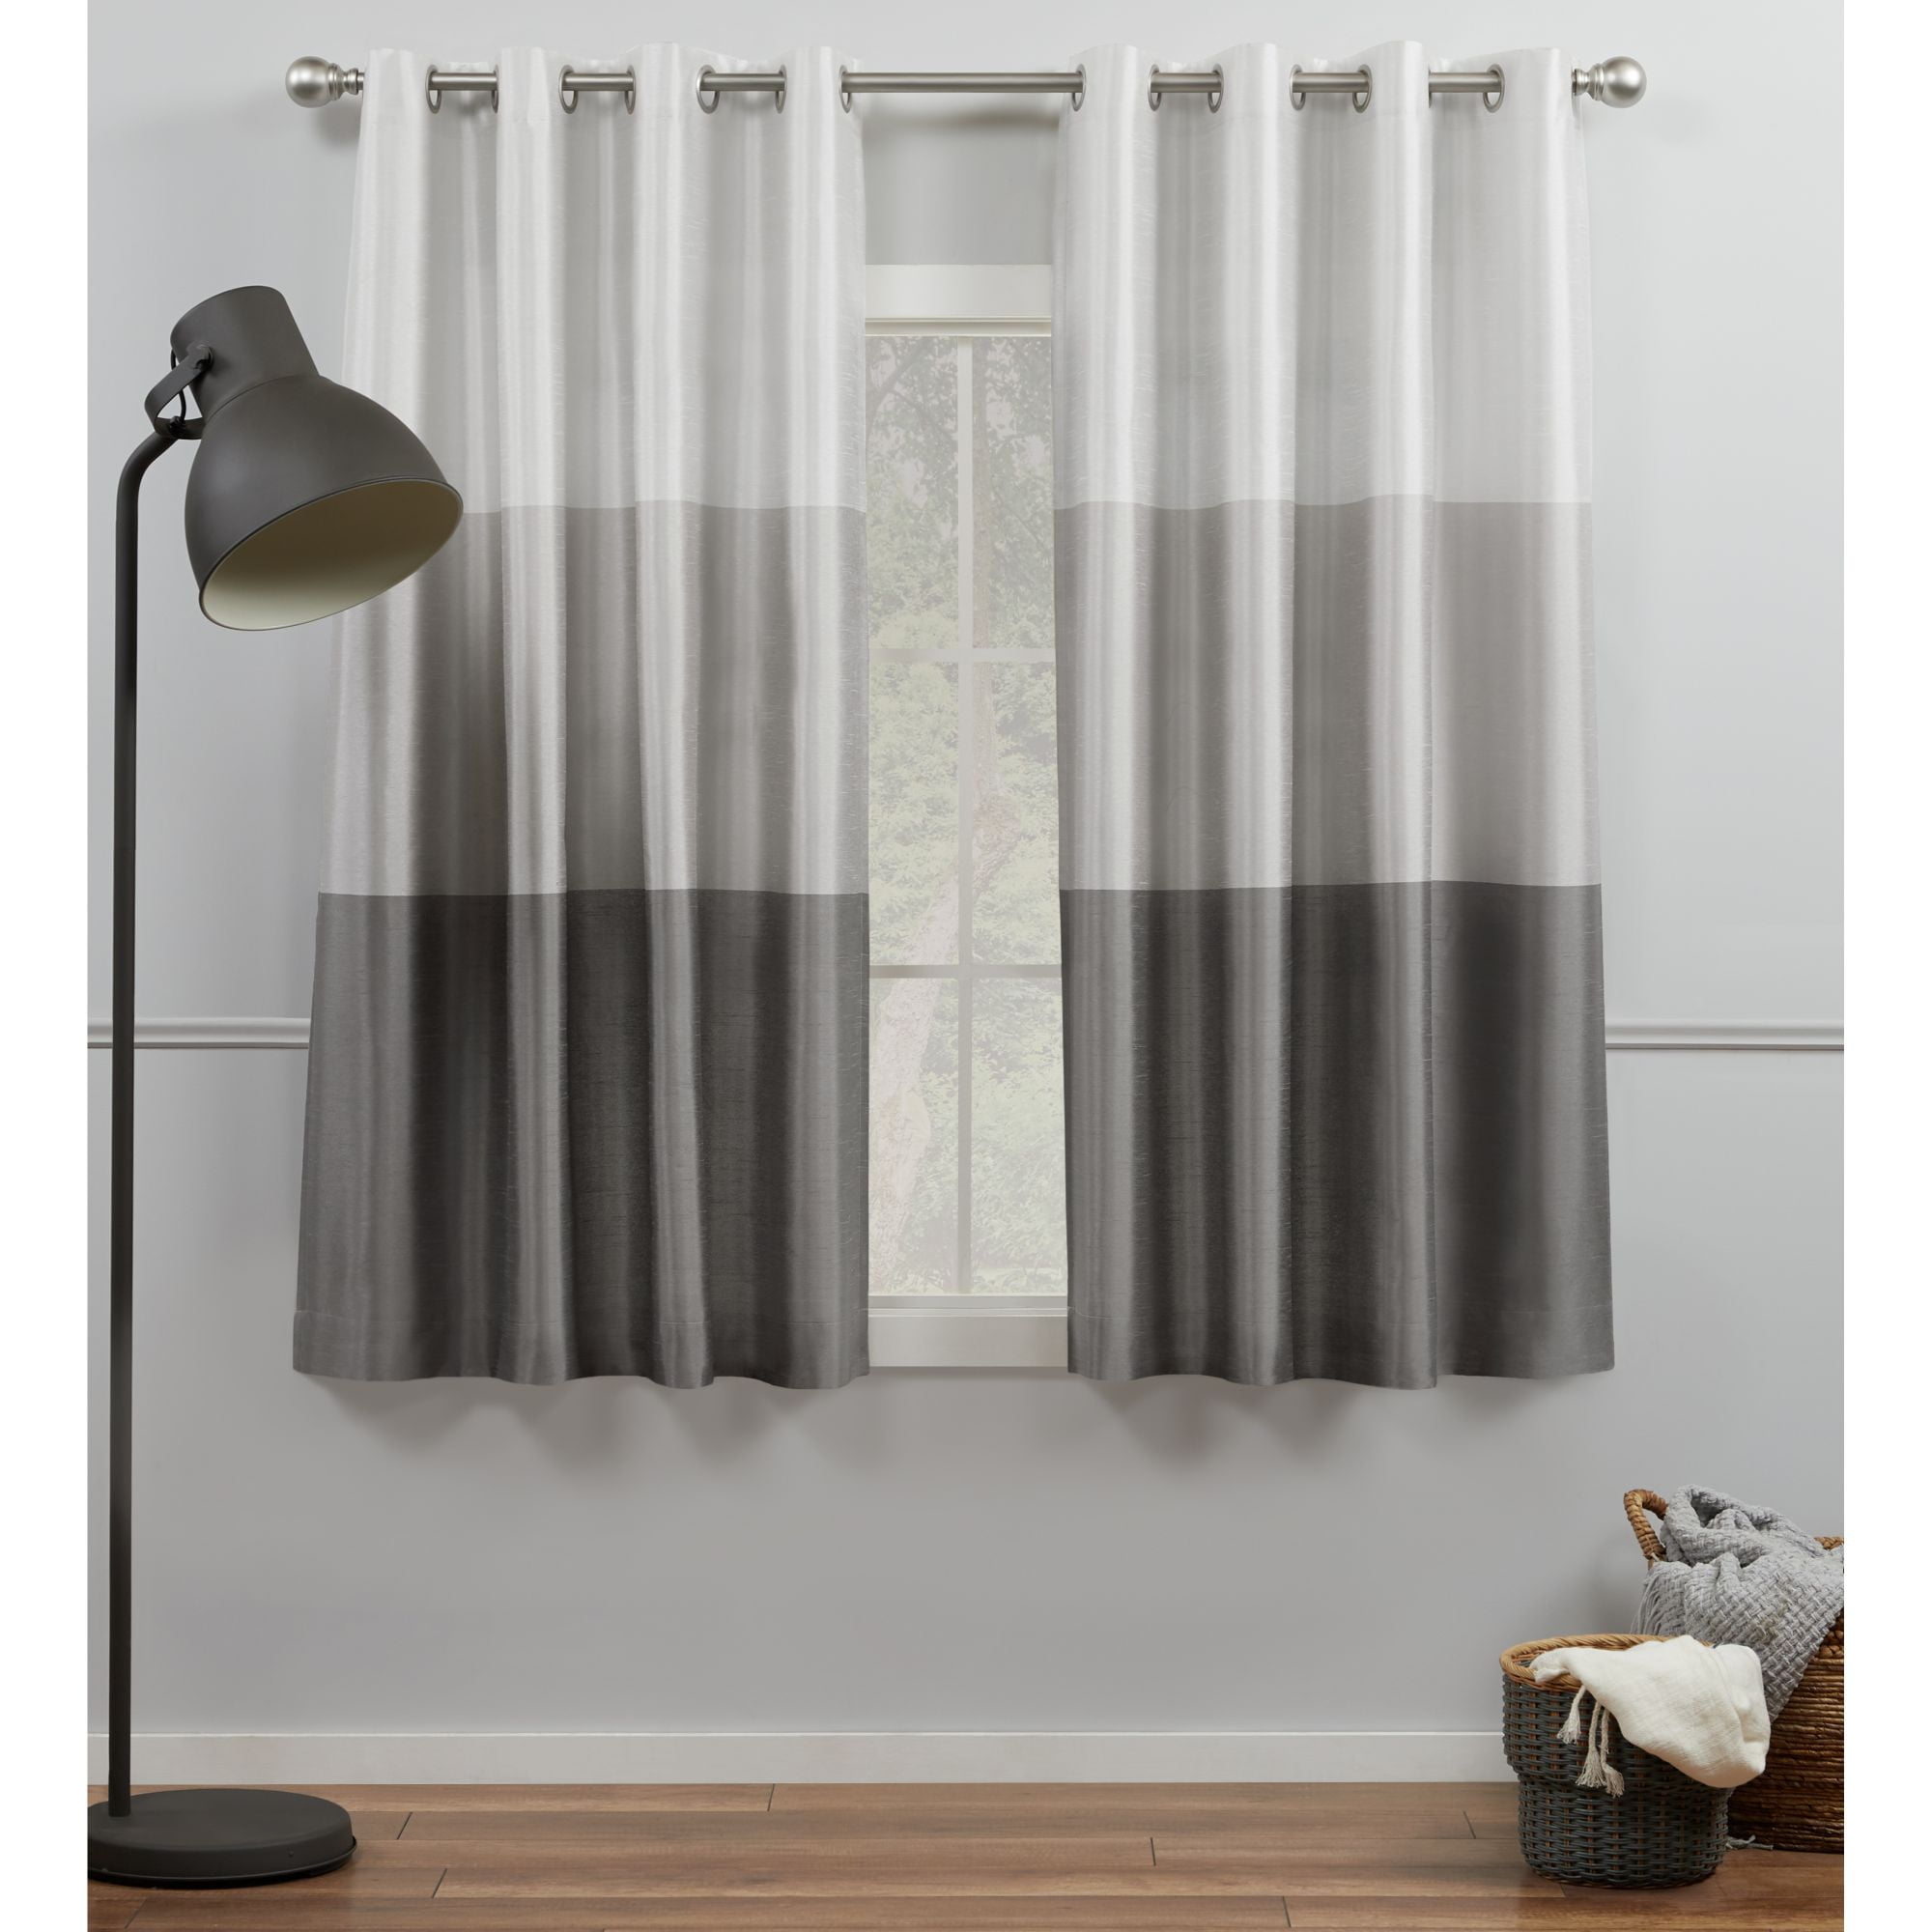 Luxury Stripe Shiny Curtains Eyelet Fully Lined Pair of Curtain Ring Top 